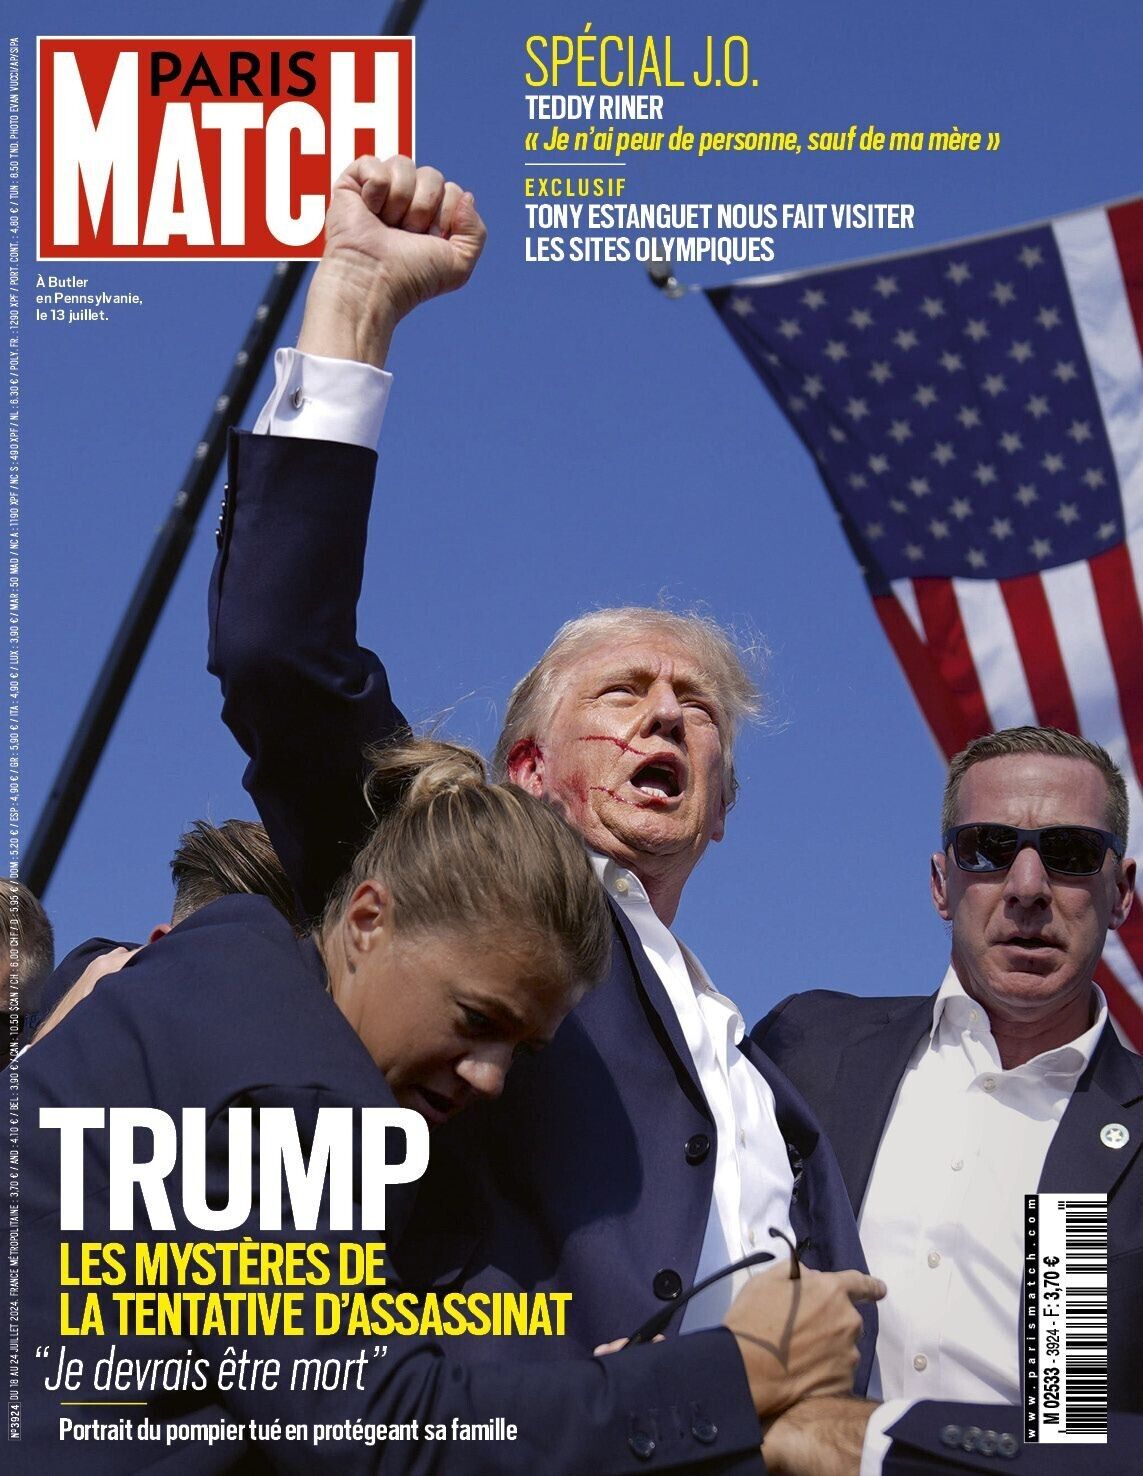 ATTACK ON DONALD TRUMP ON THE COVER OF THE FRENCH PARIS MATCH COLLECTOR ISSUE